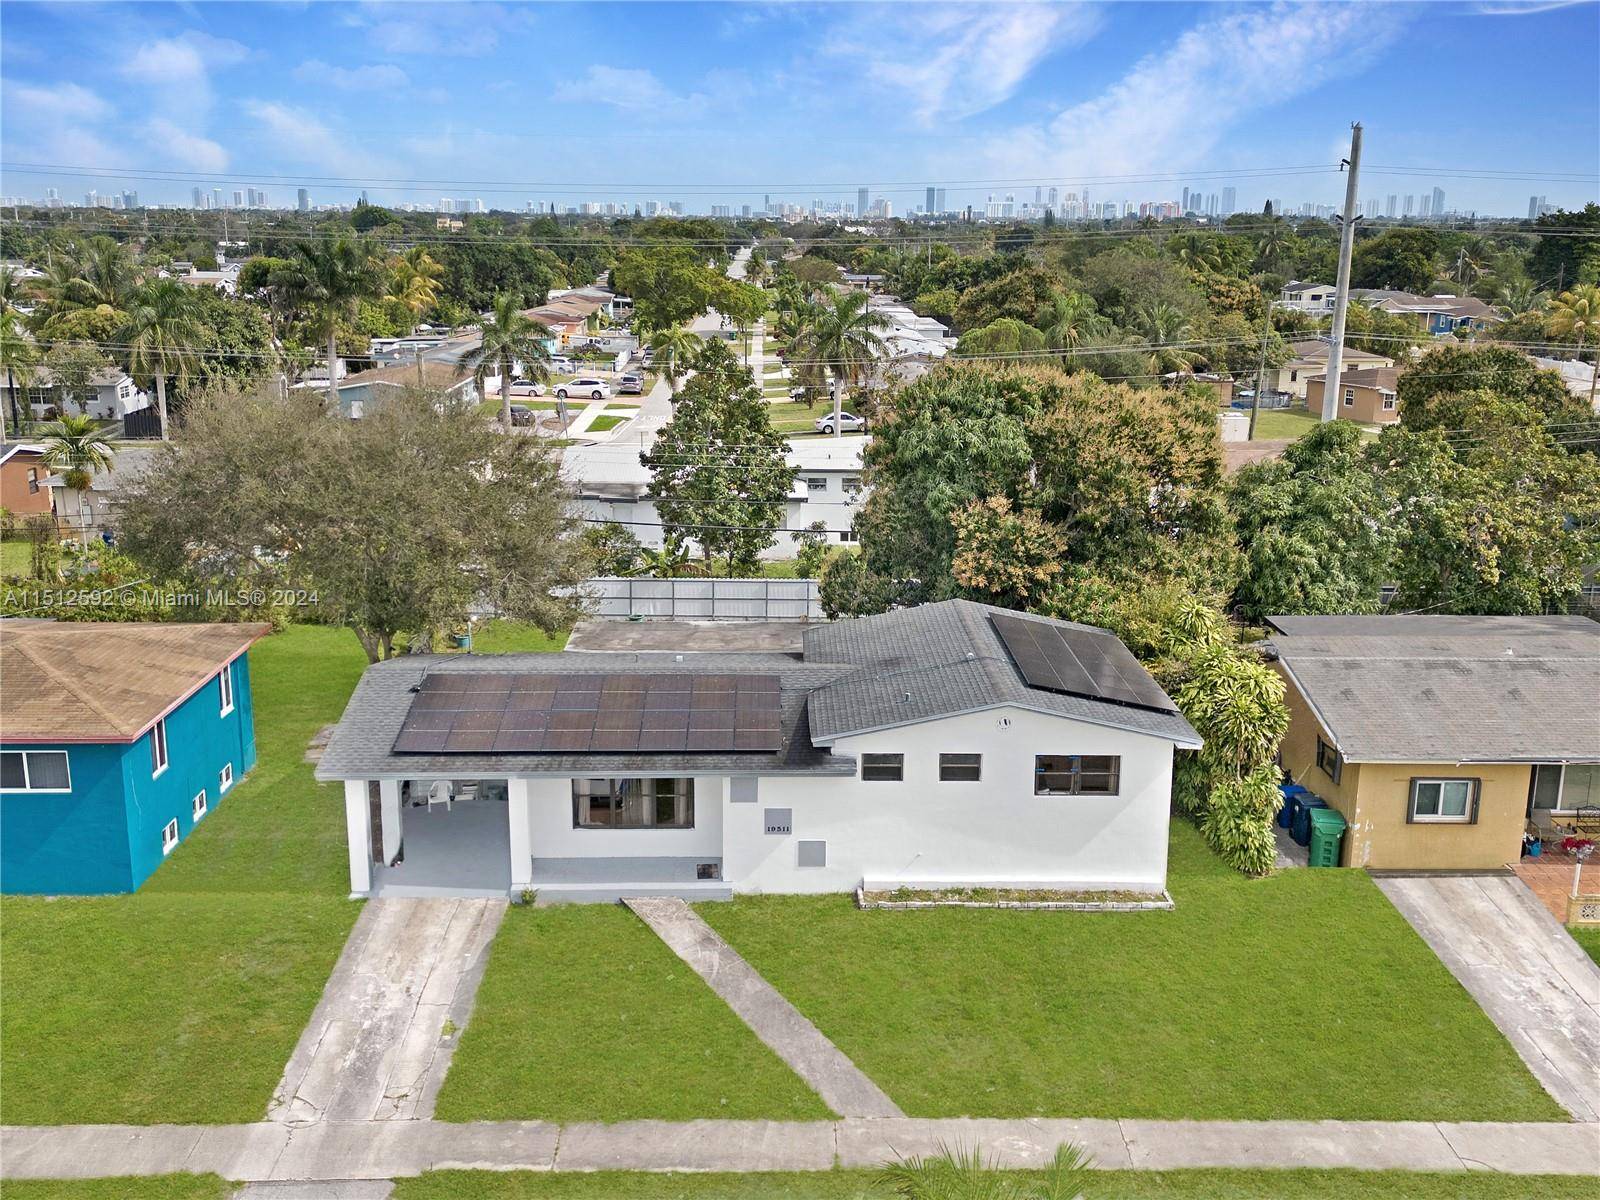 Step into this renovated four bedroom, two bathroom home nestled in Miami Gardens.